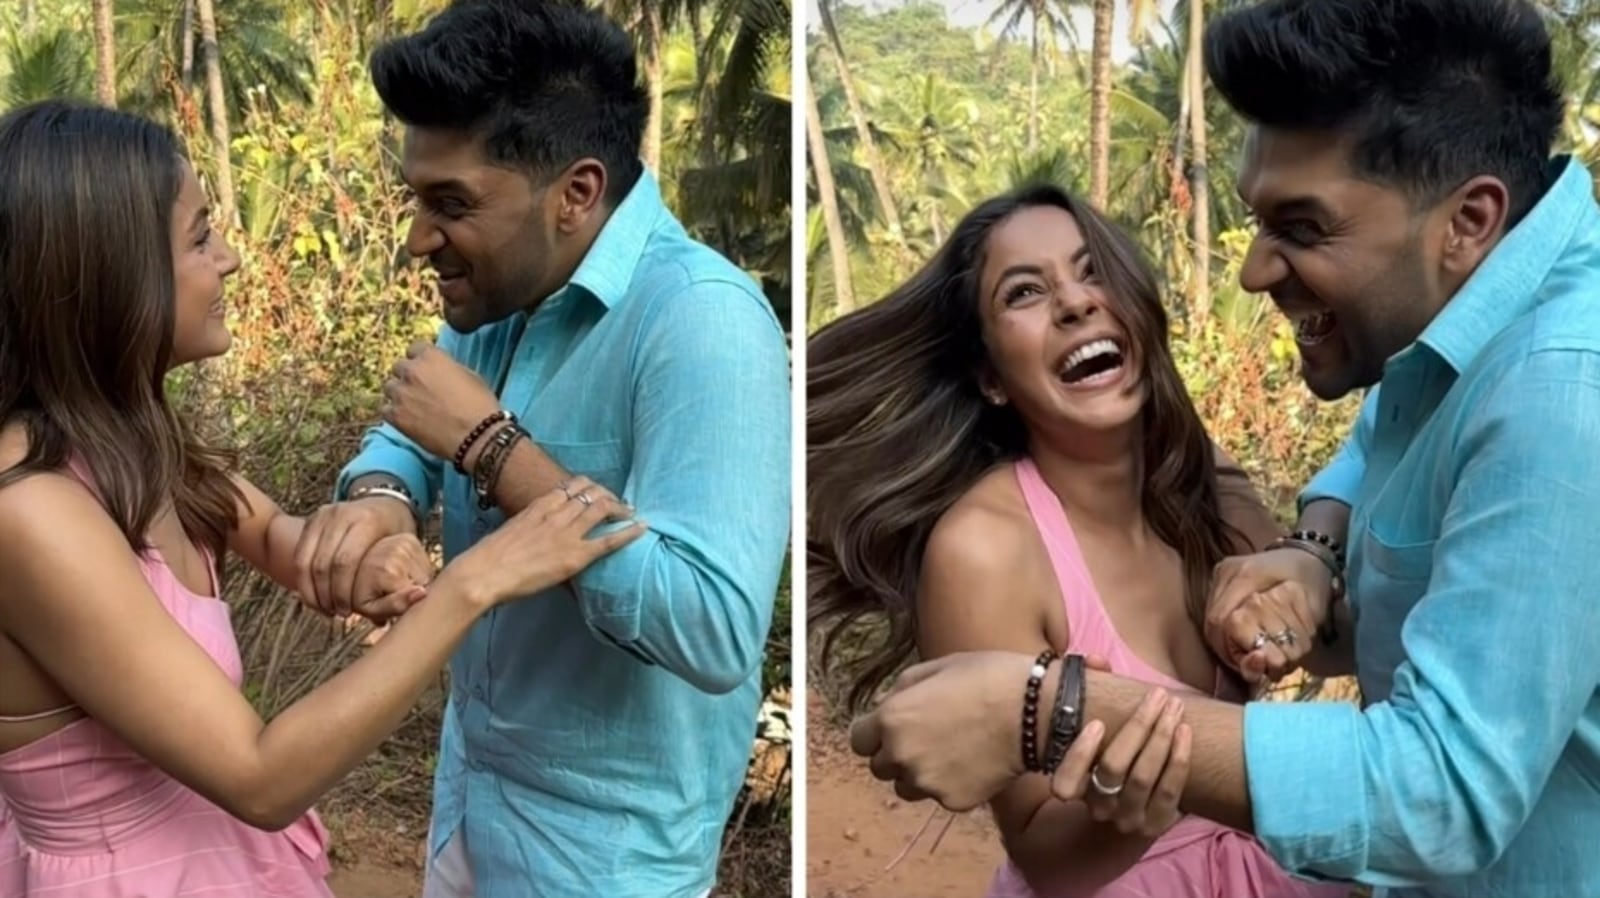 Guru Randhawa shares video with Shehnaaz Gill; asks fans if they ‘look cute together’. Here’s how they reacted